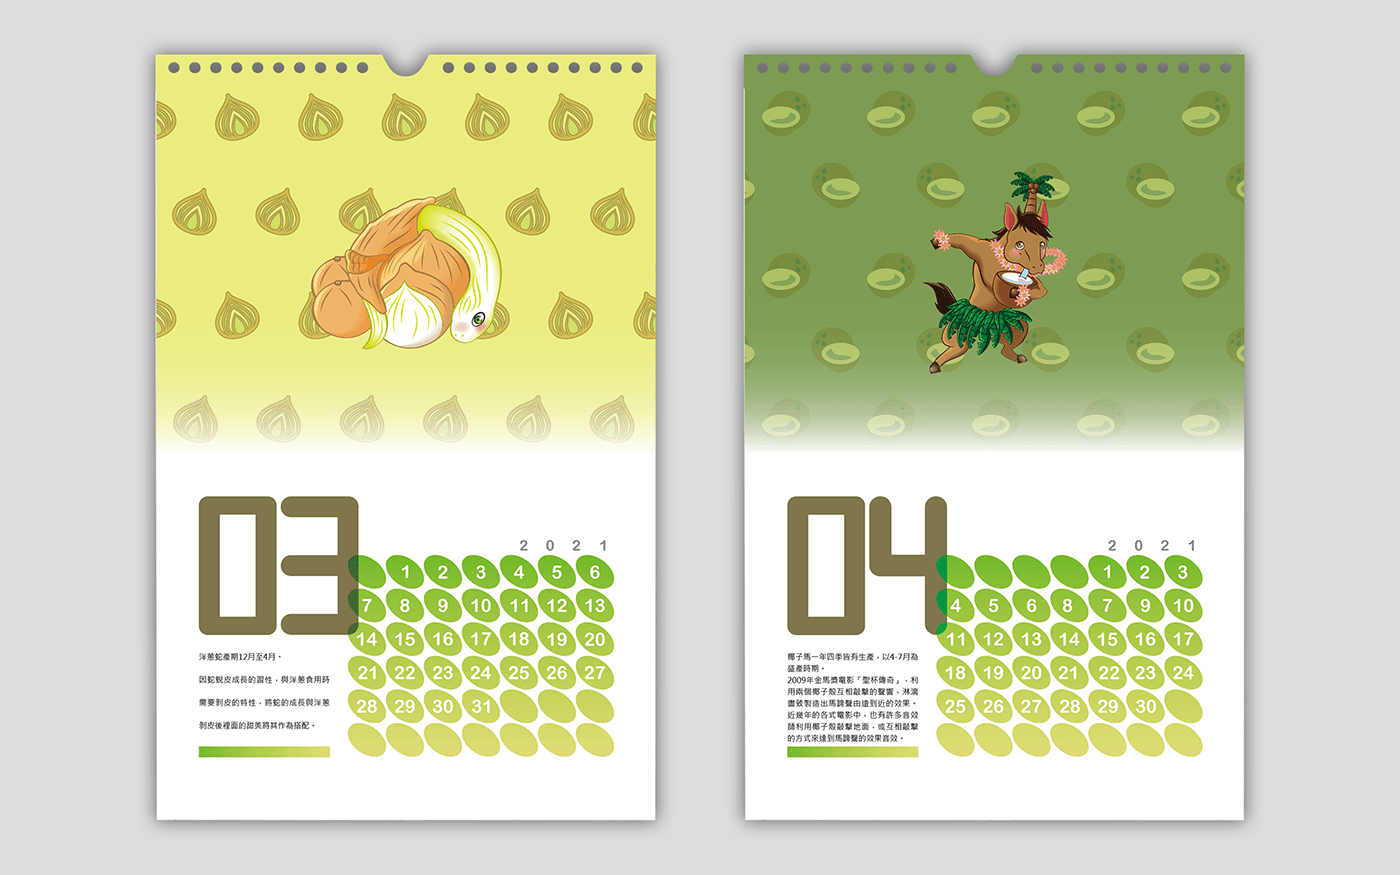 design monthly calendar chinese zodiac agricultural products almanac